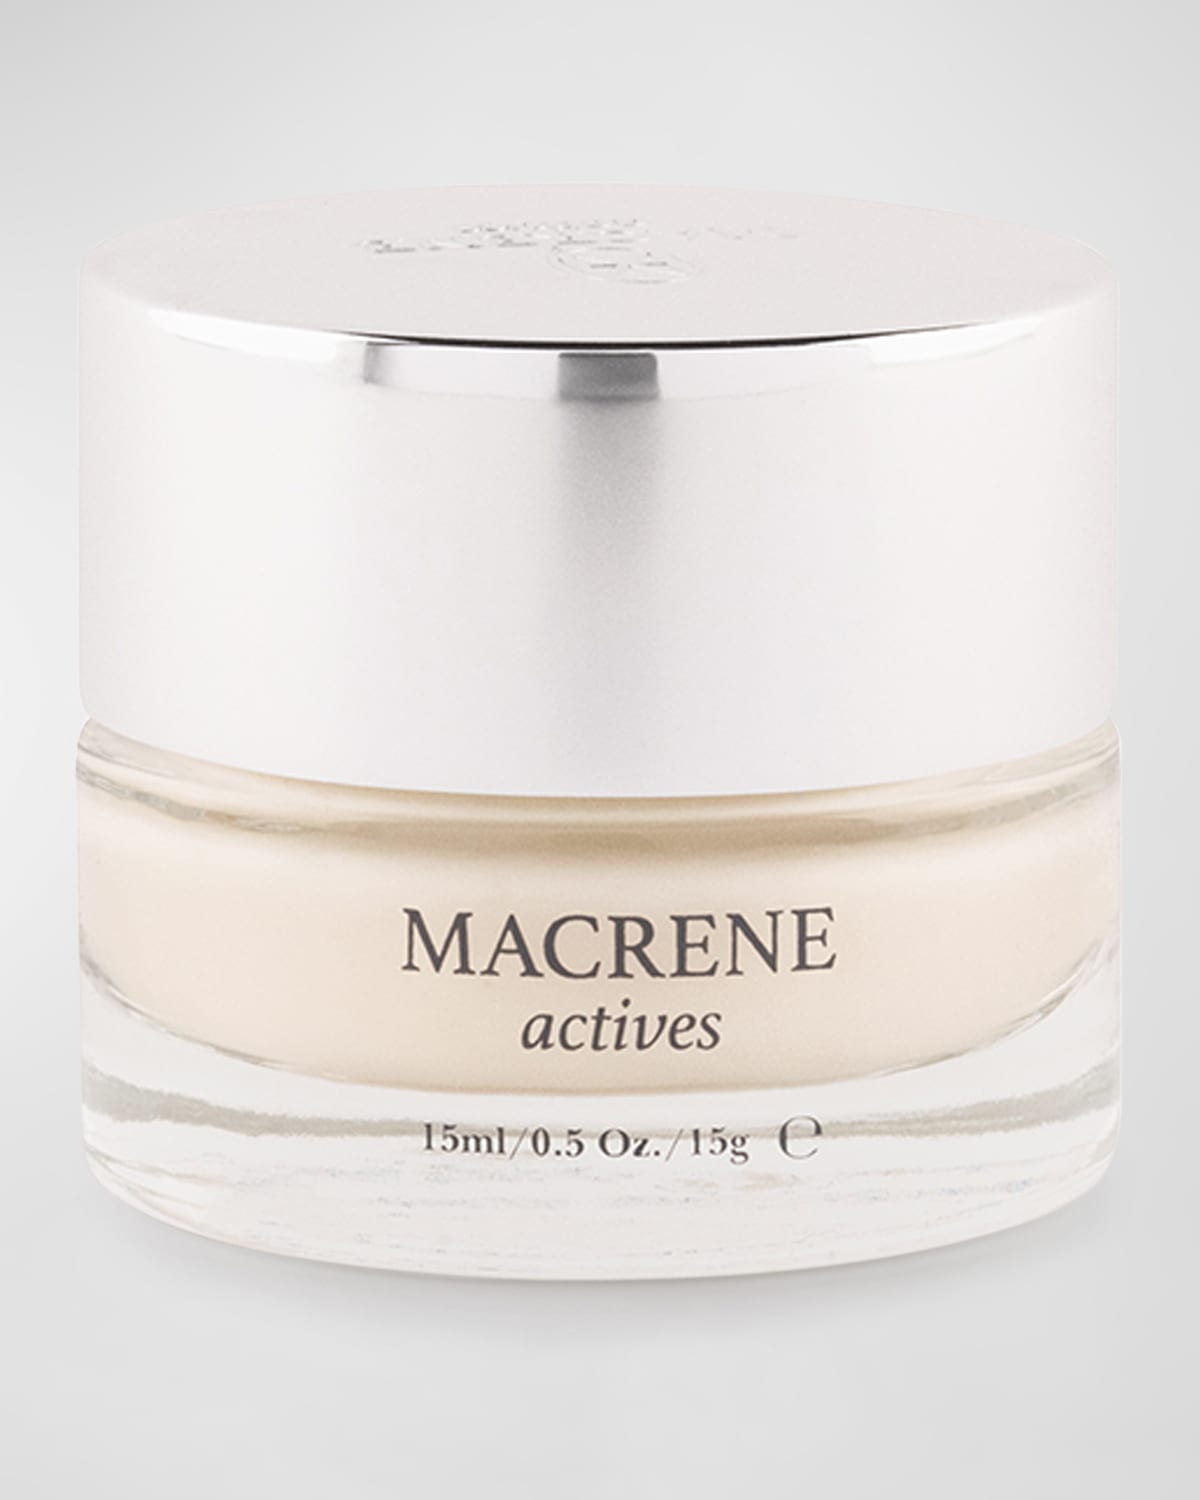 Luxury Mini Face Cream, Yours with any $250 Macrene Actives Order